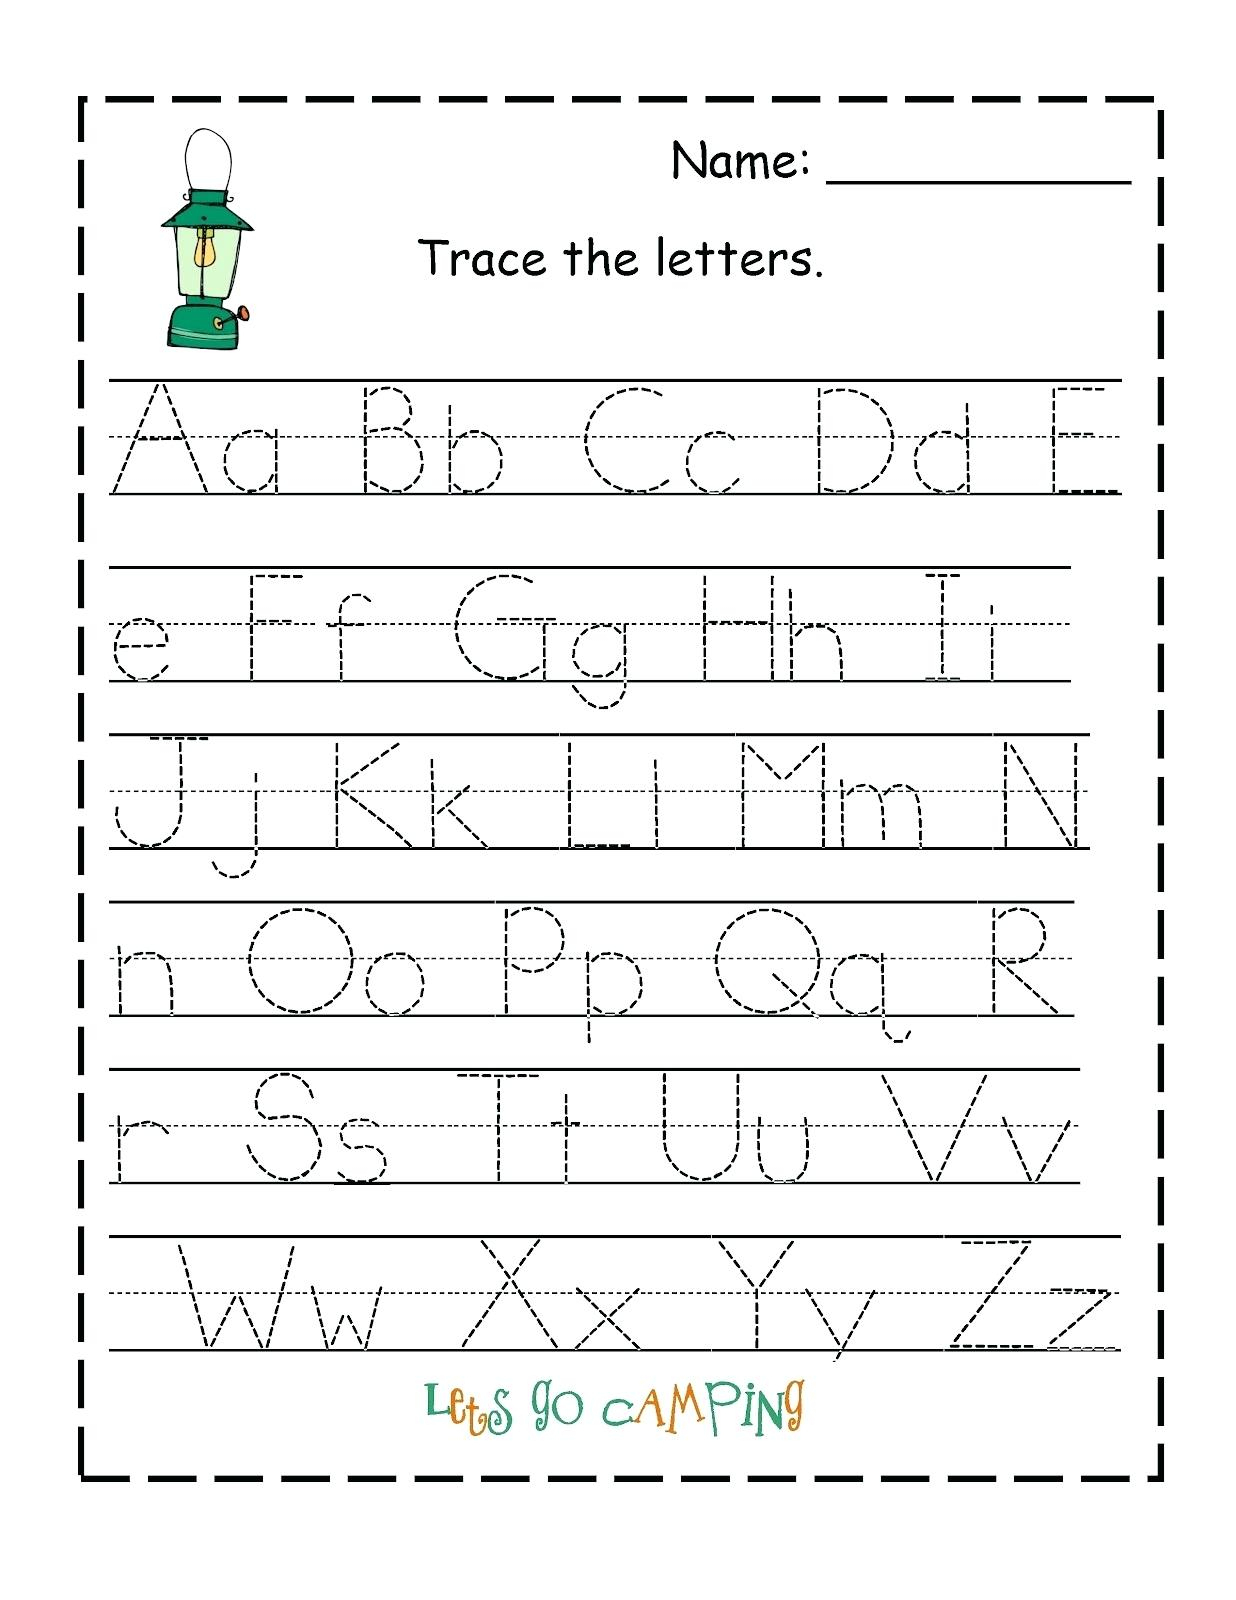 Free Printable Traceable Letters Free Printable Preschool Worksheets - Free Printable Tracing Letters And Numbers Worksheets